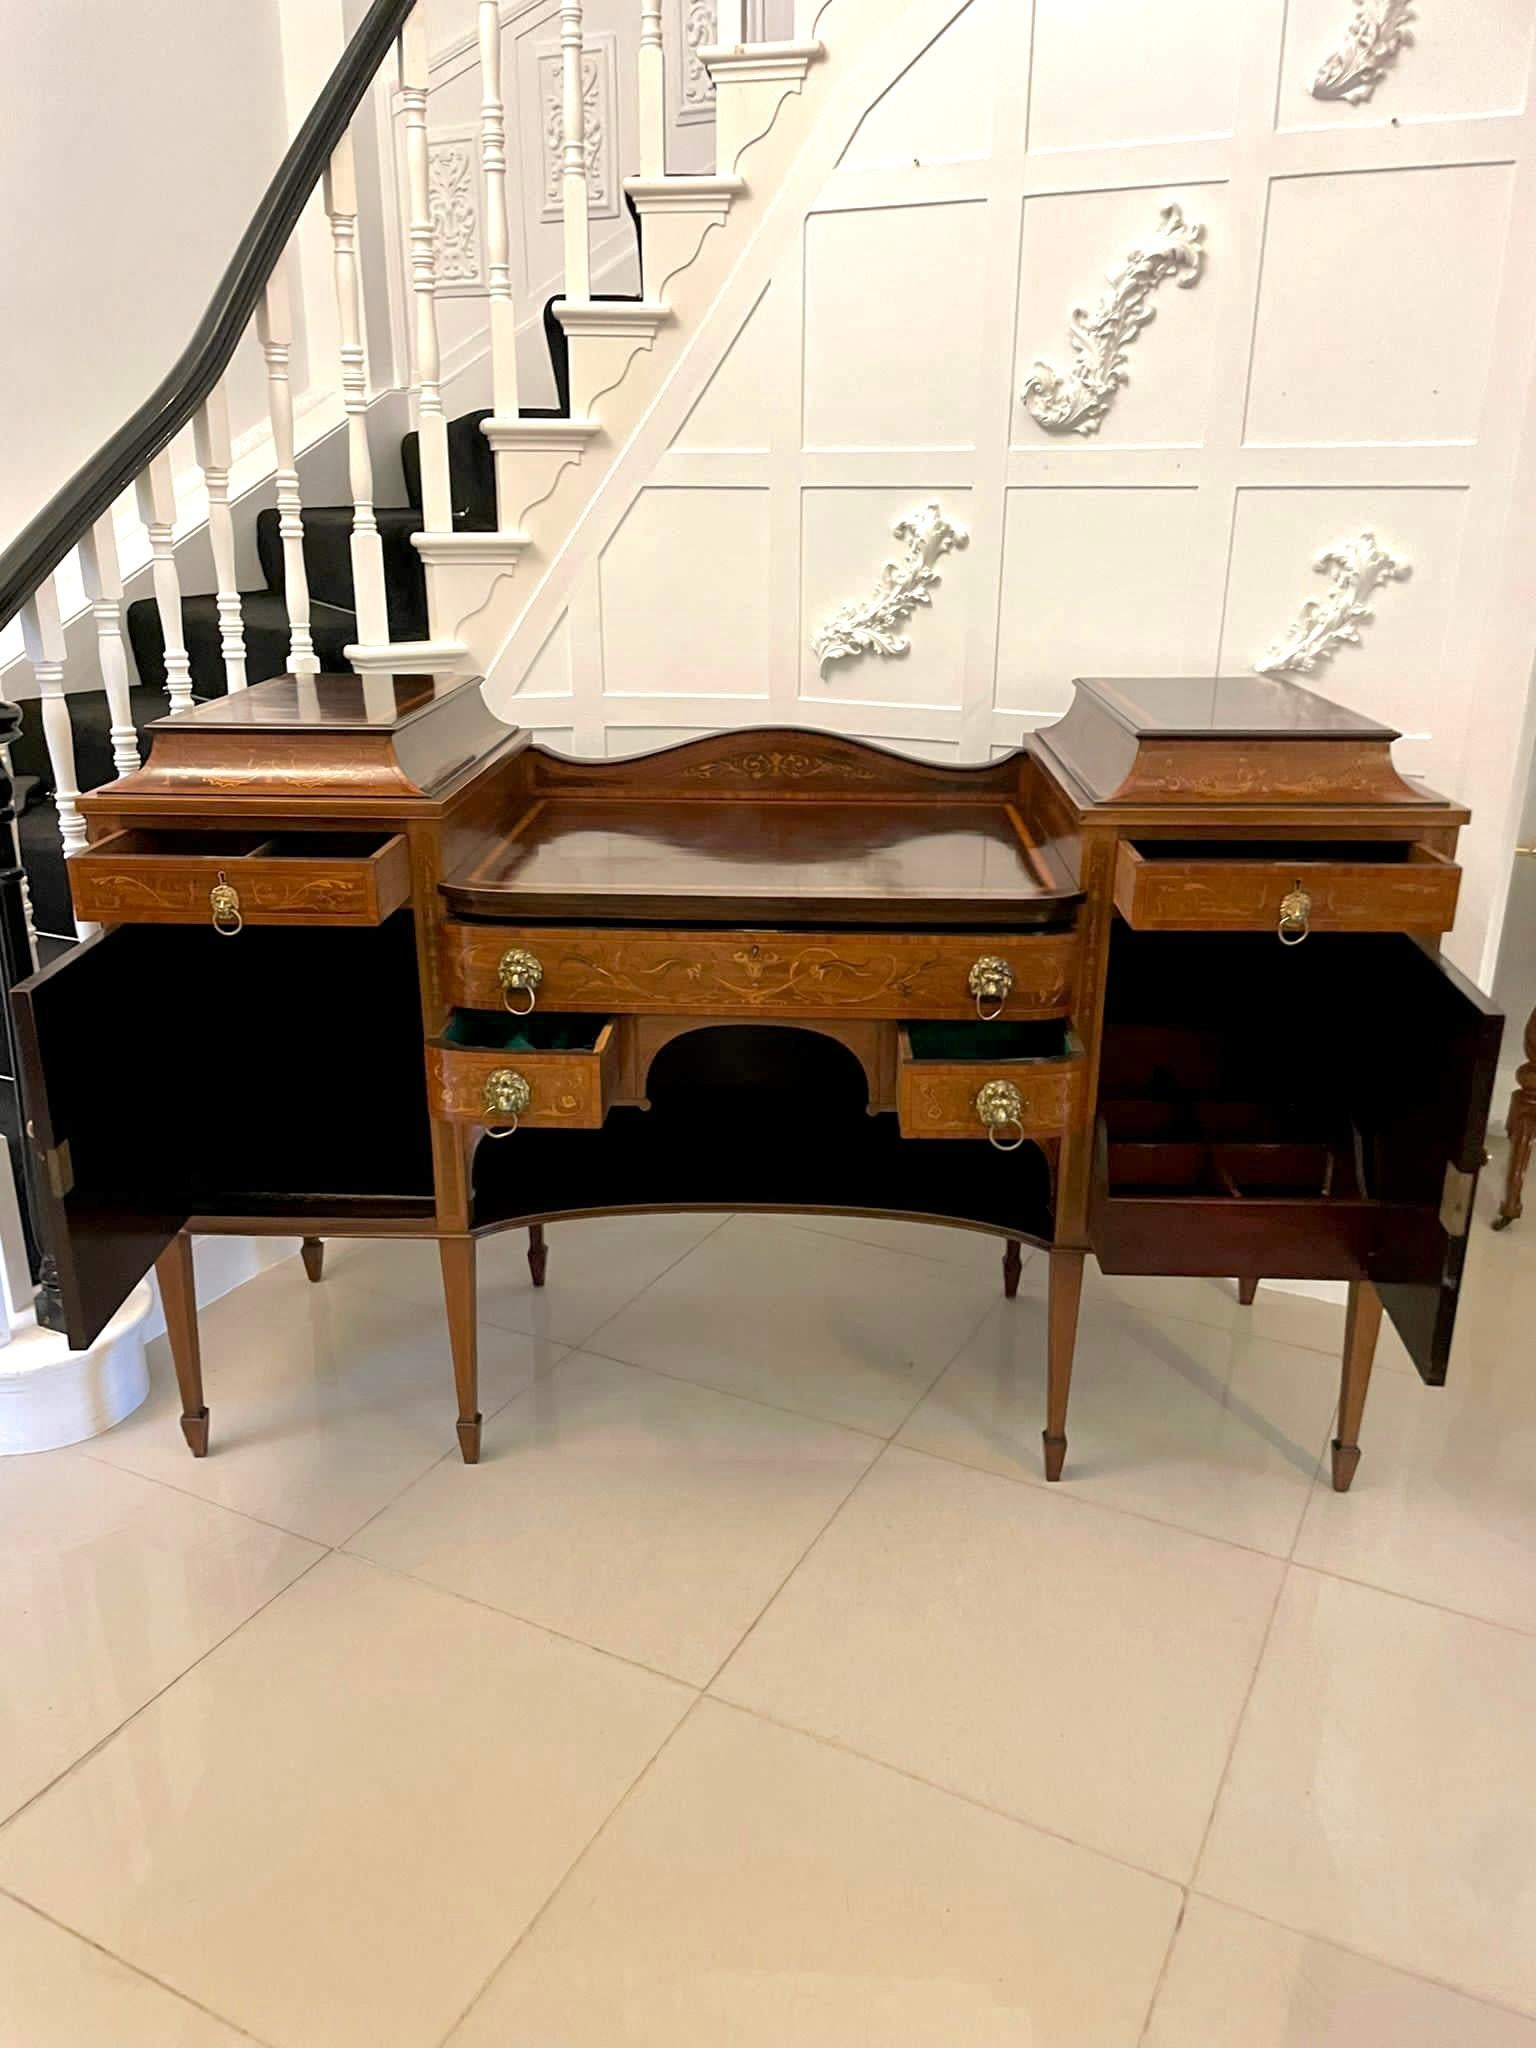 Fine quality antique 19th century mahogany inlaid marquetry sideboard by Hewetsons, London having a splendid shaped gallery back with satinwood inlay above twin pedestal cabinets with fantastic inlaid marquetry and floral motifs which open to reveal